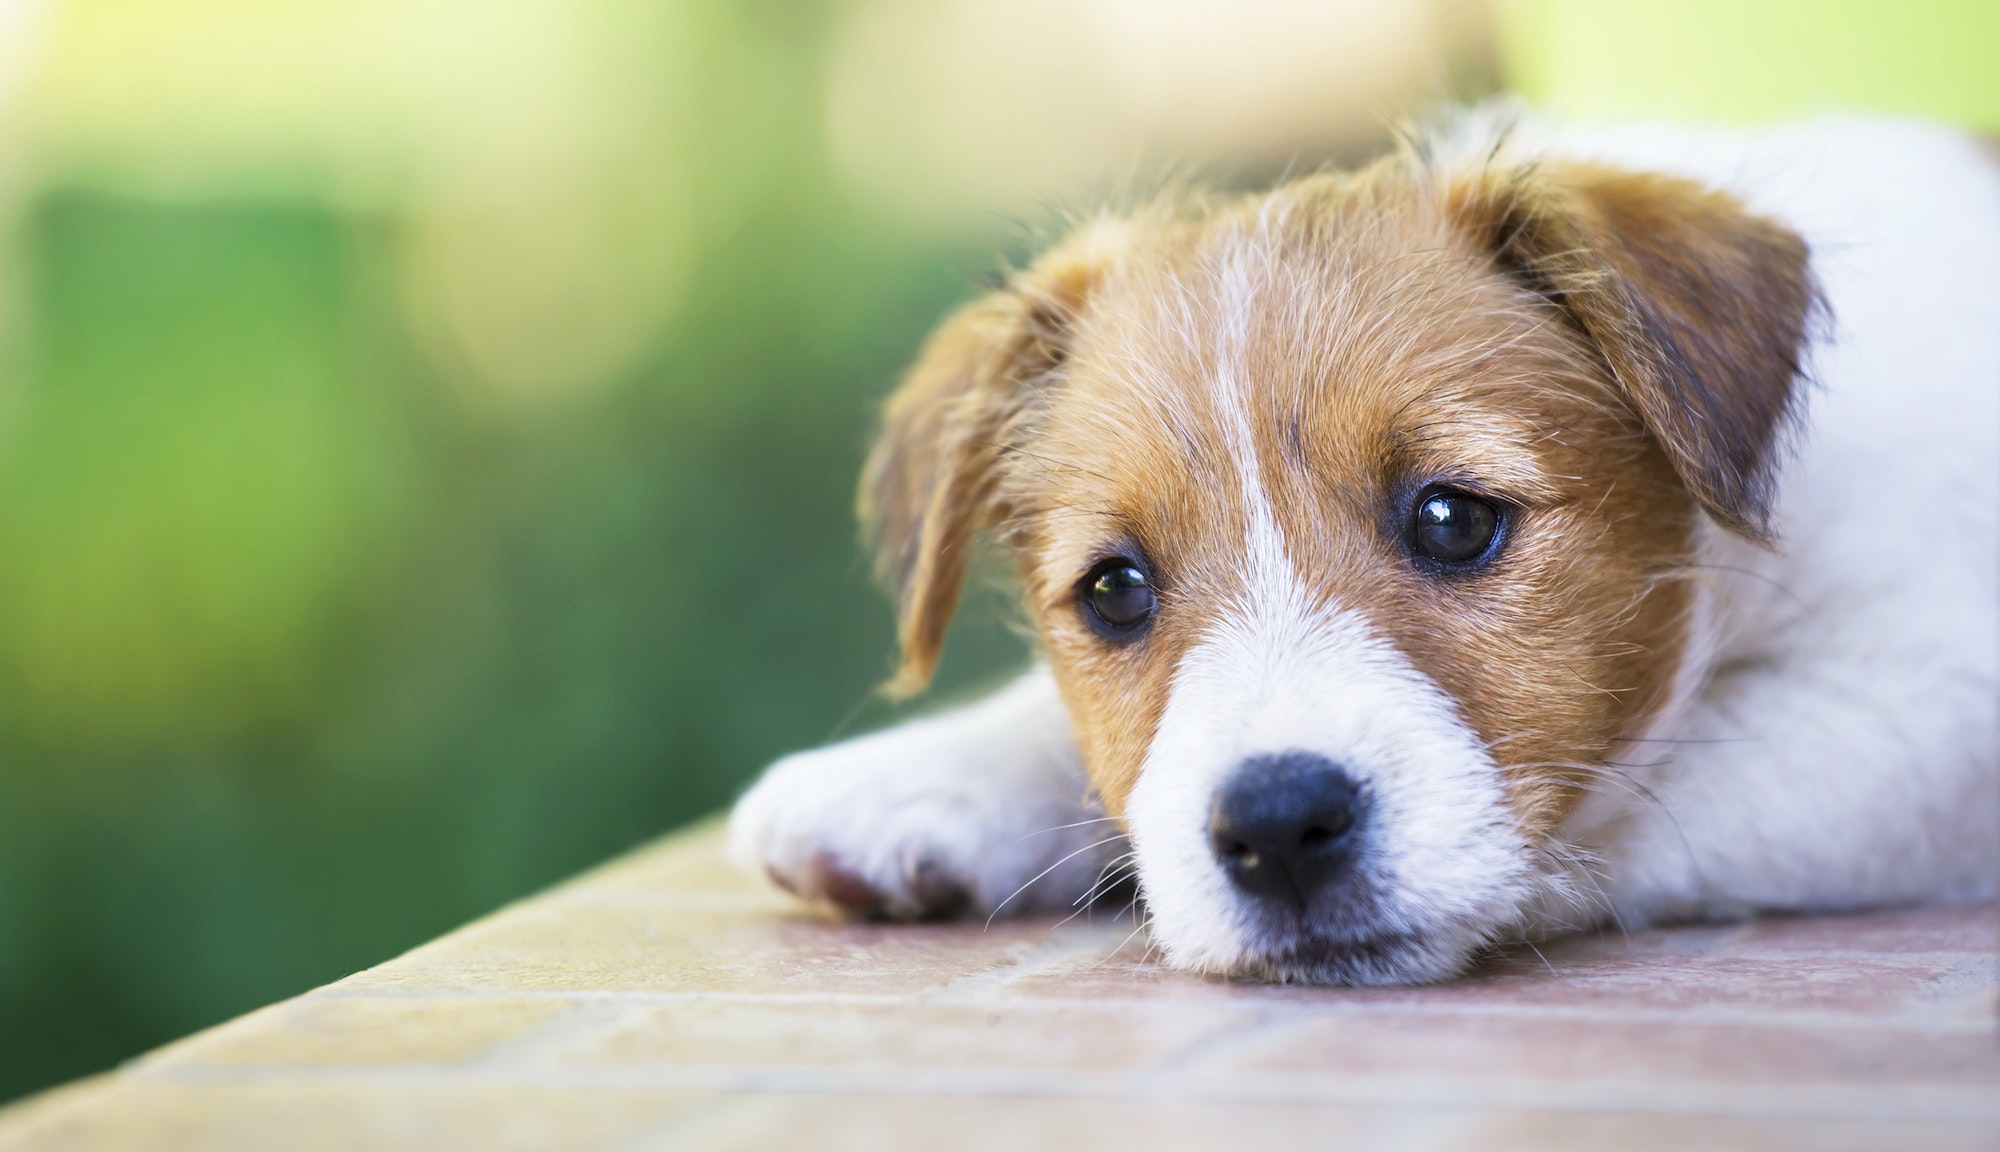 Adorable cute puppy thinking - dog therapy concept